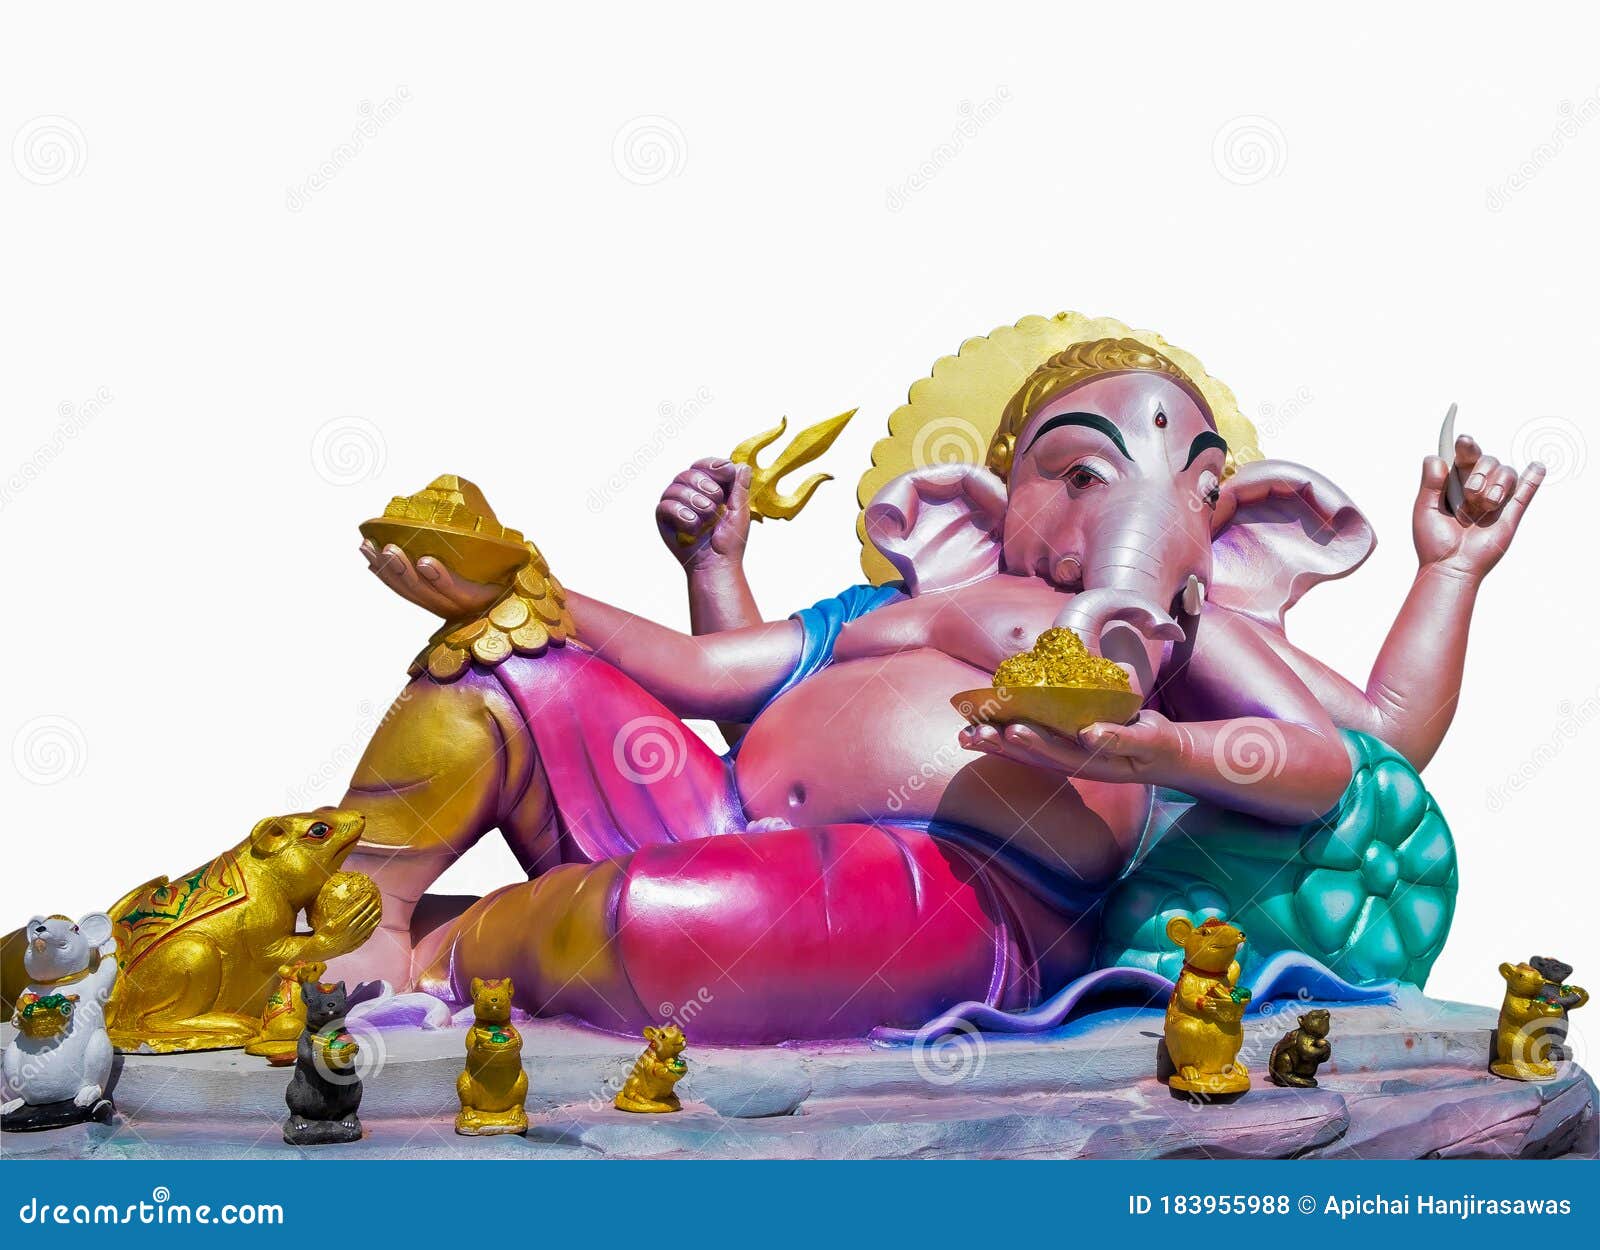 How to determine which side is the trunk of Lord Ganesha? - Quora